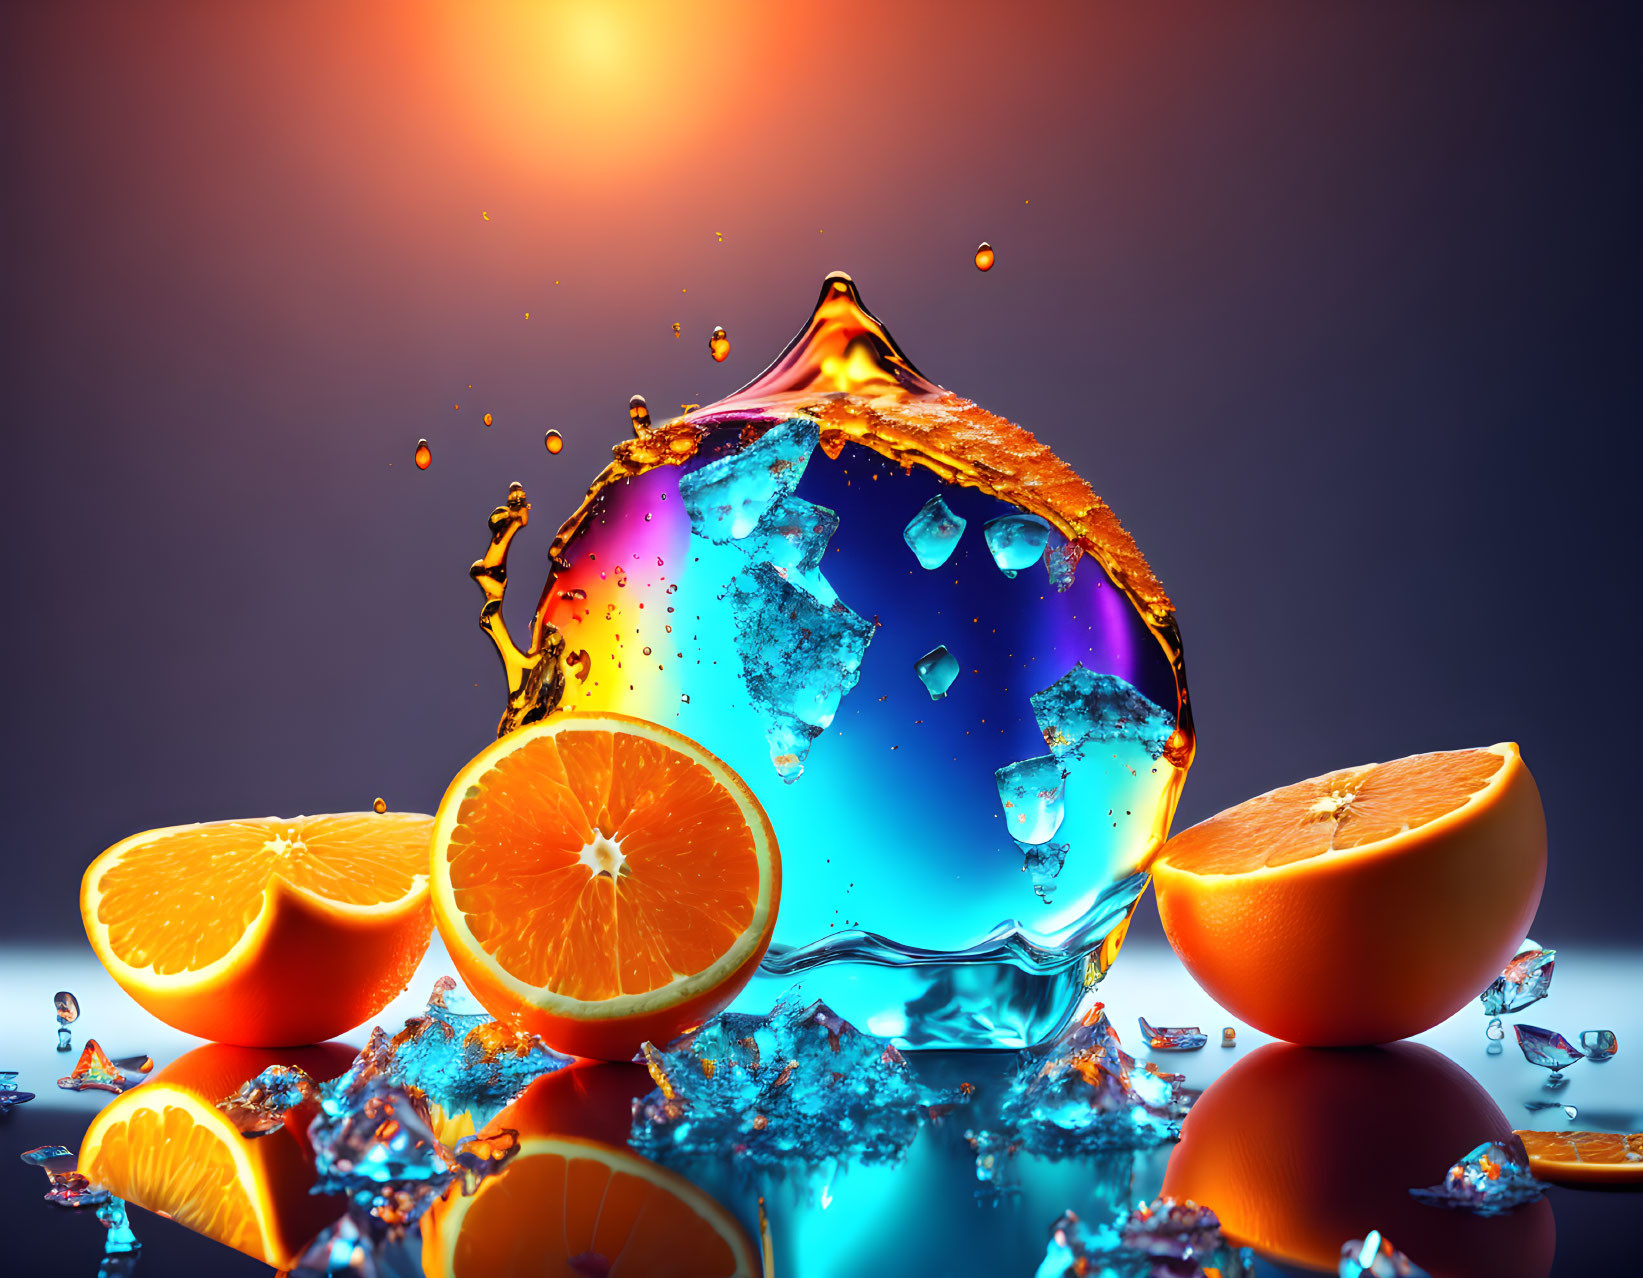 Colorful Water Bubble with Citrus Fruit Slices at Sunset